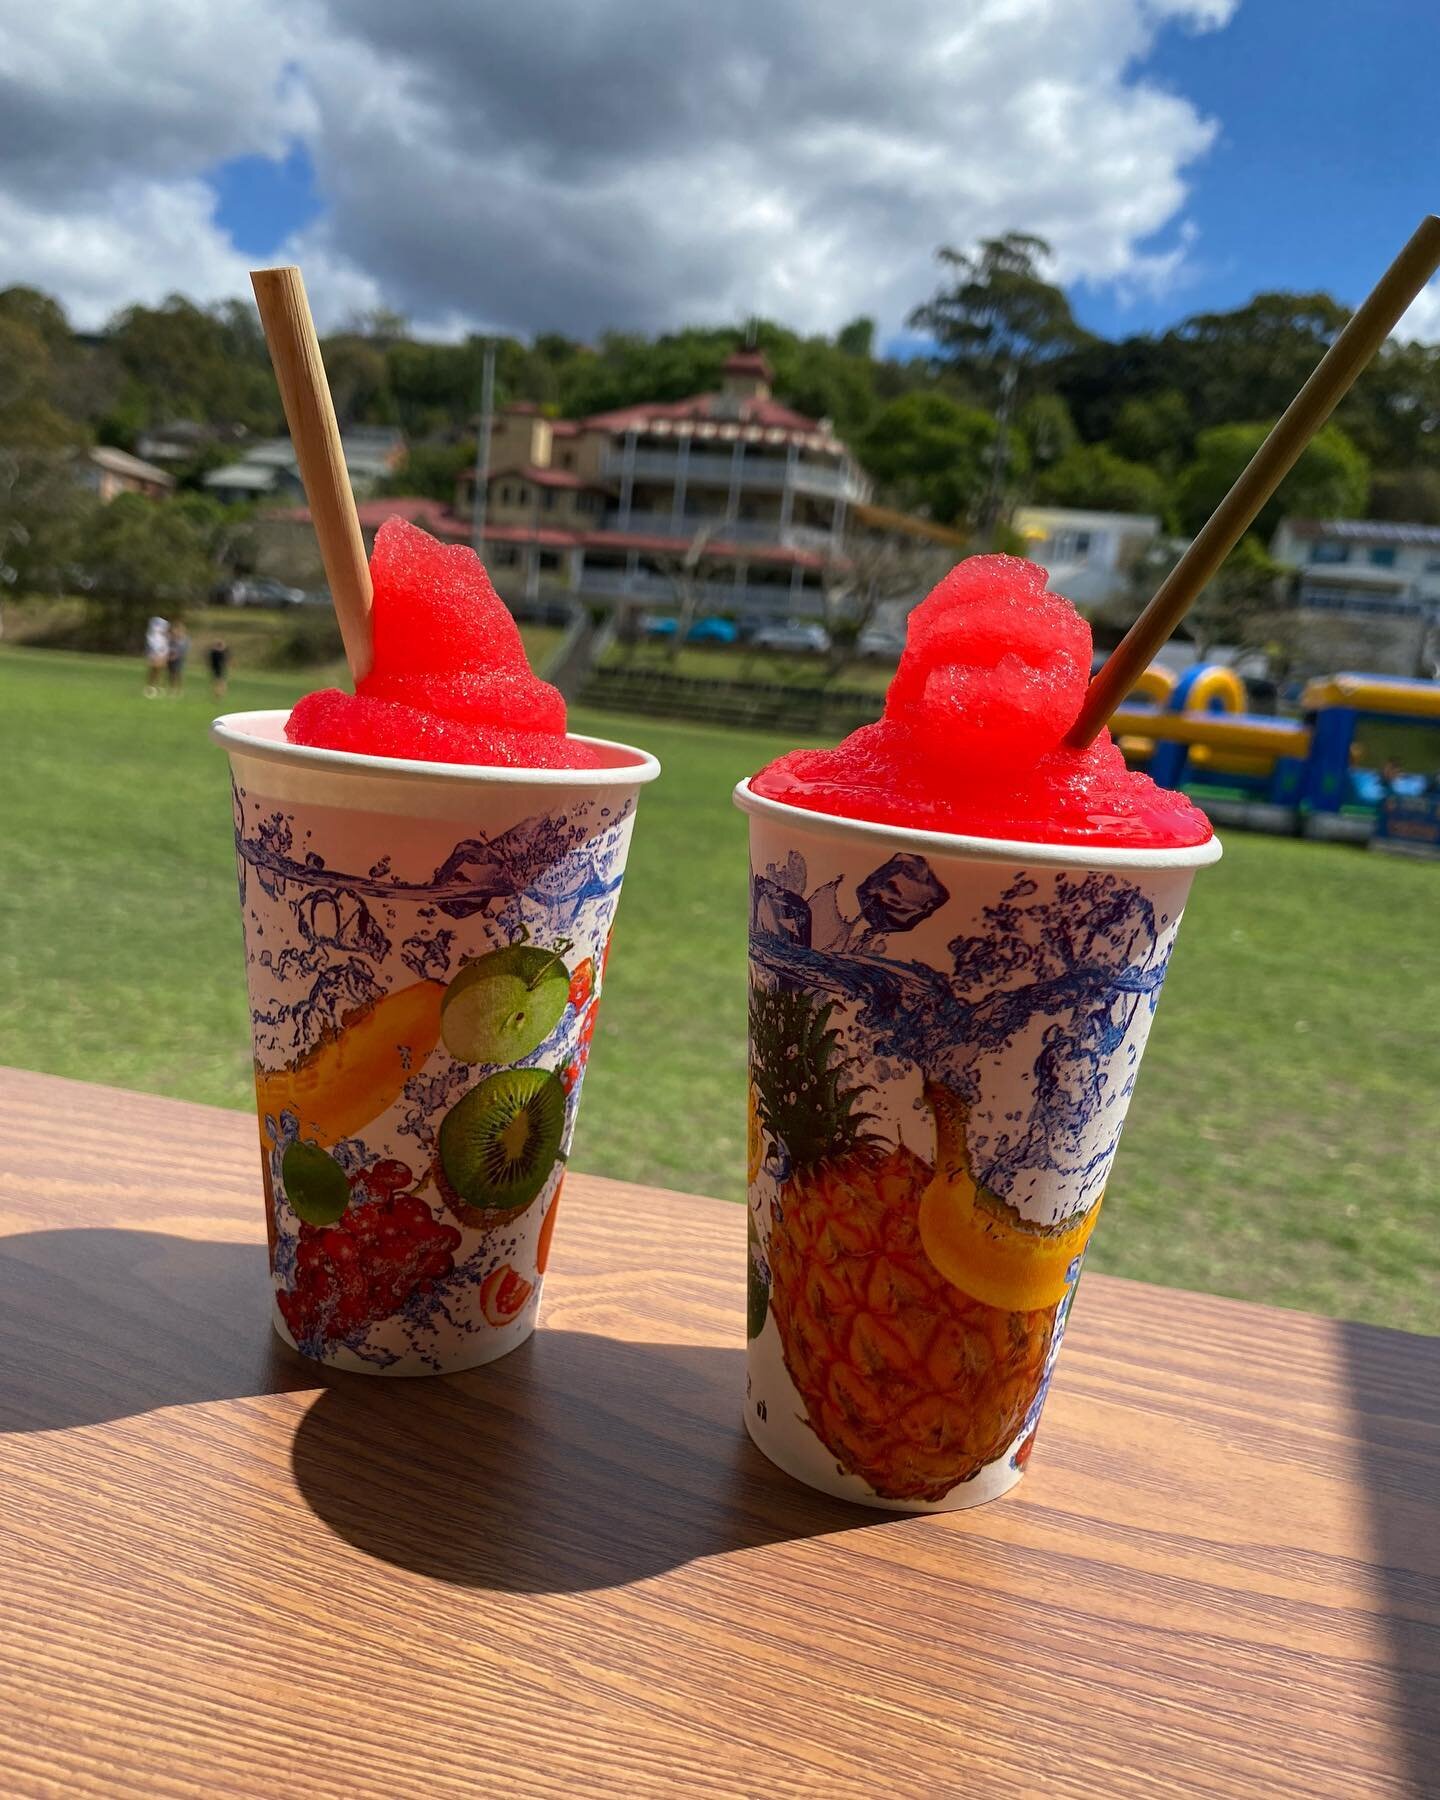 Introducing our new product Kids Slushies, at La Boujee Bar 🌈 
Perfect way to keep your little ones refreshed and smiling this summer ☀️ #laboujeebar #mobilebar